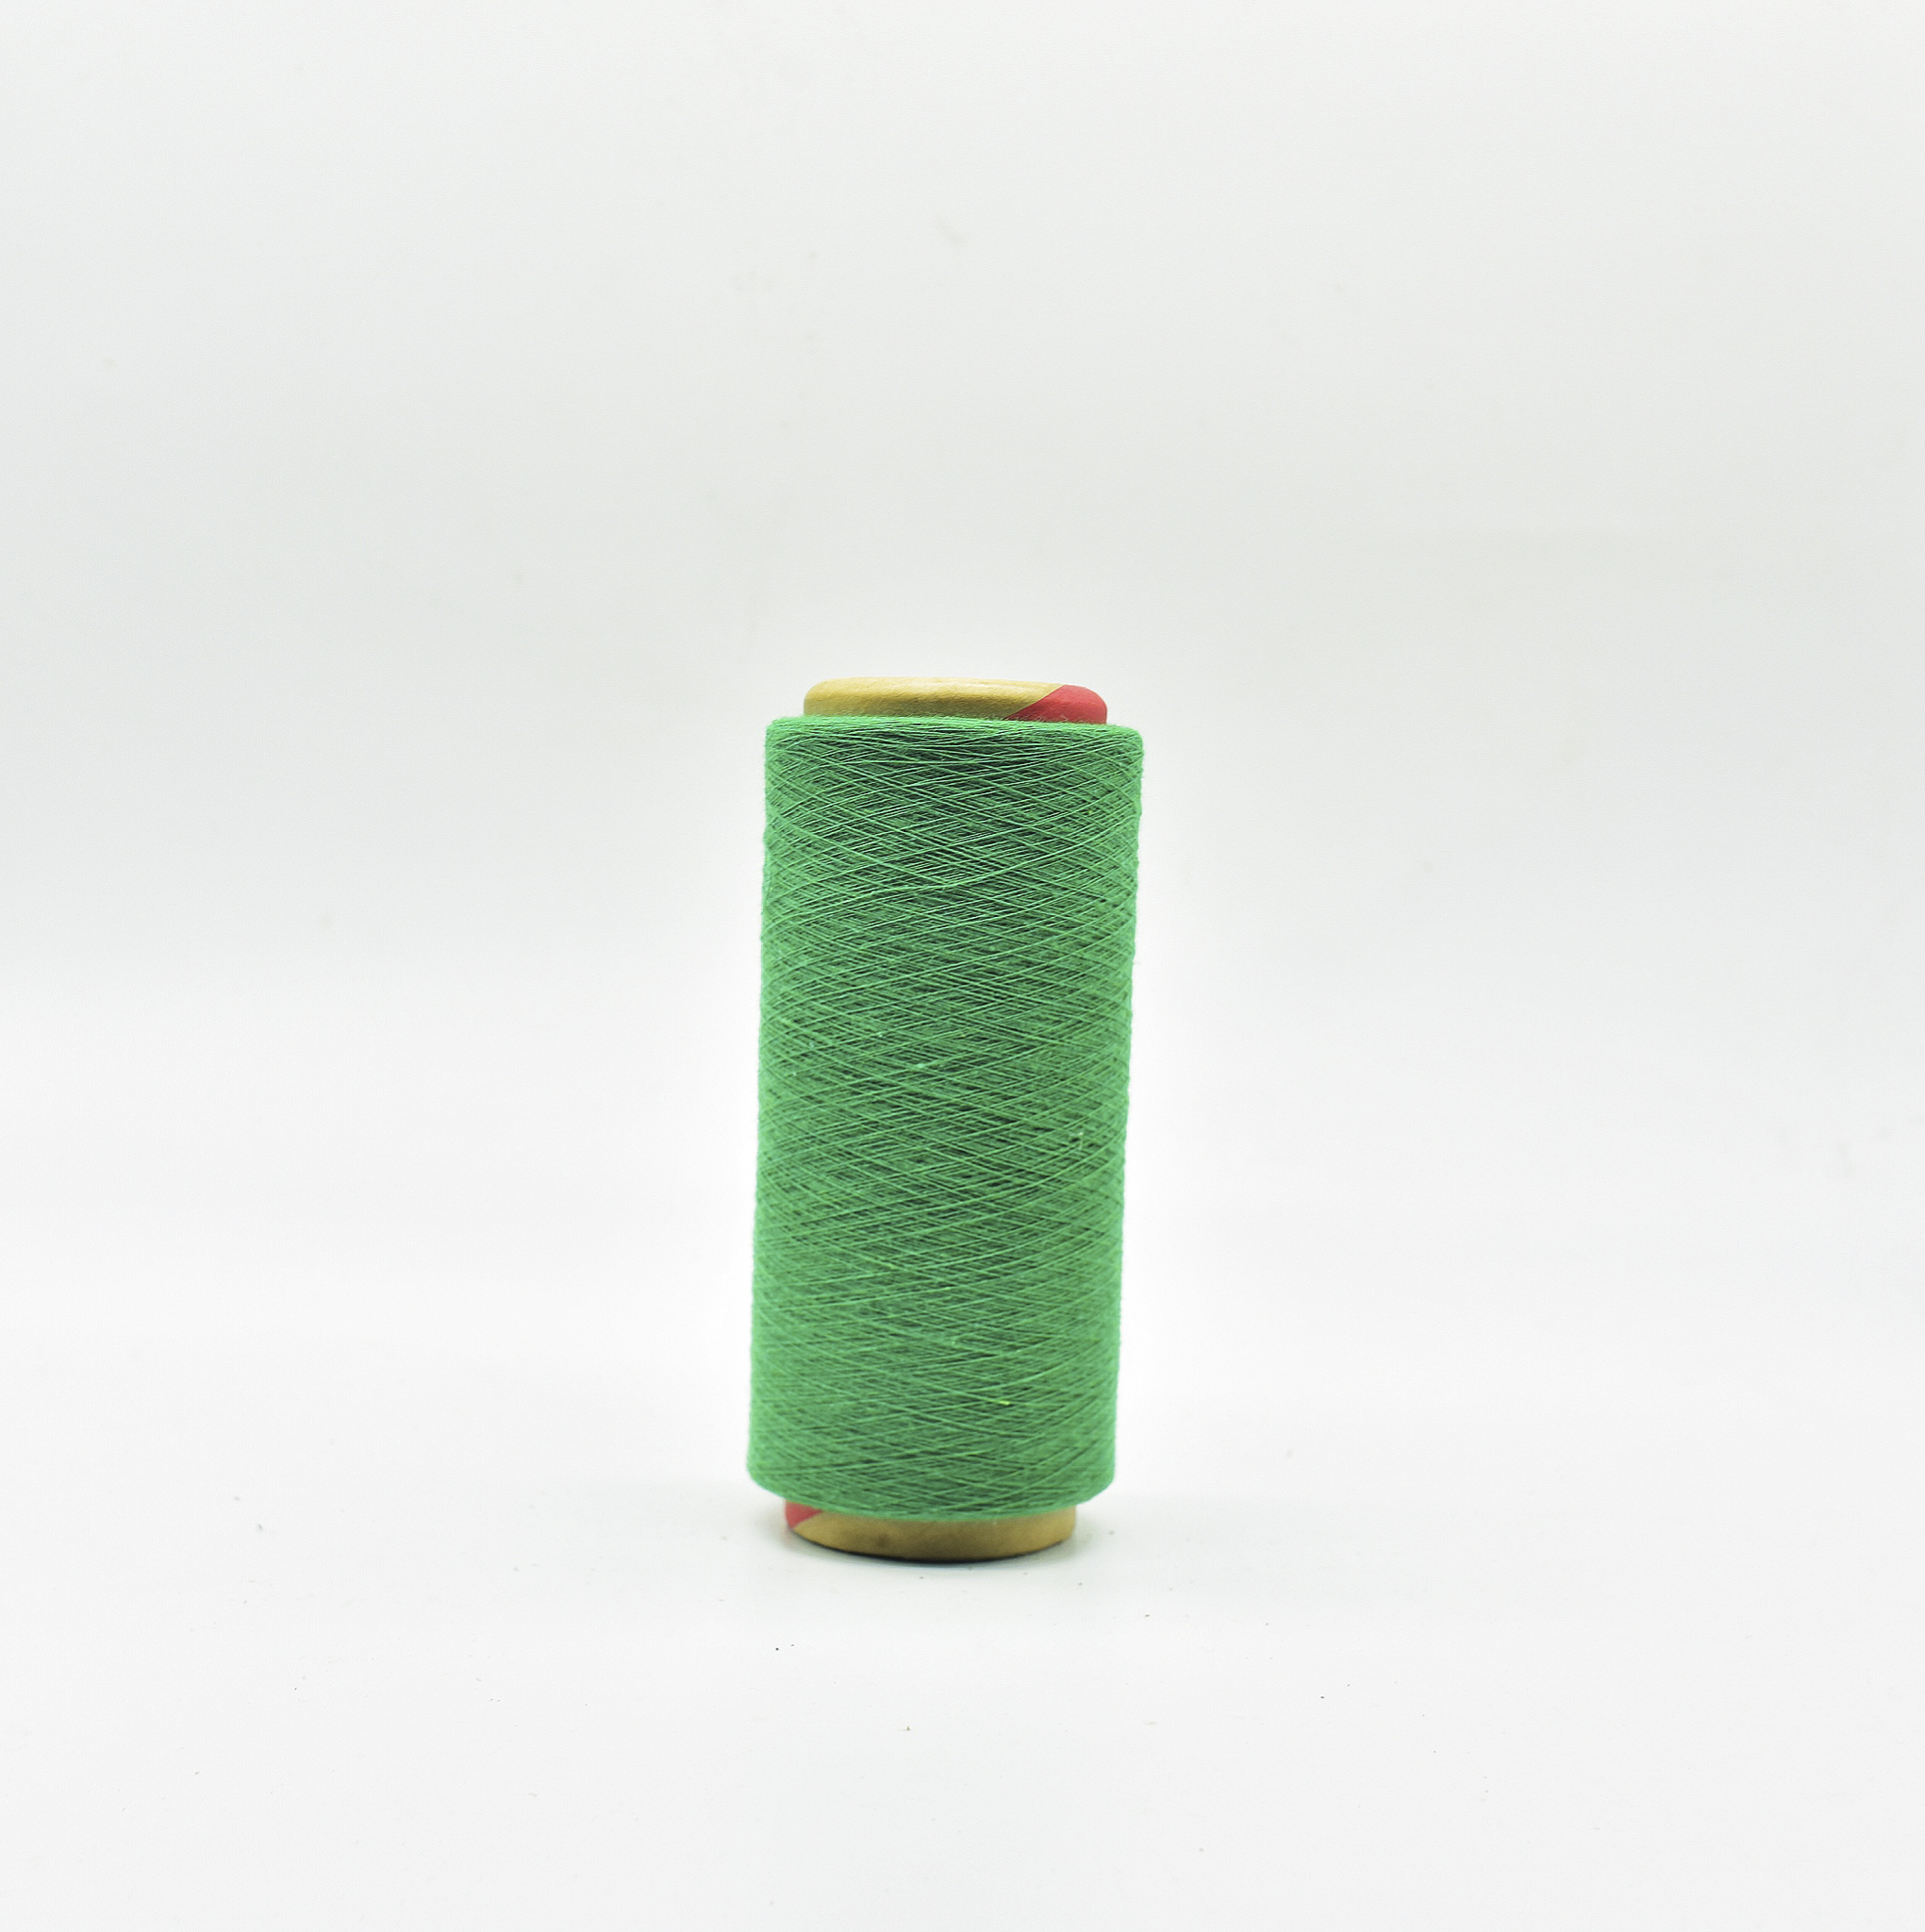 NE 16S Green colors recycled cotton yarn for knitting socks 